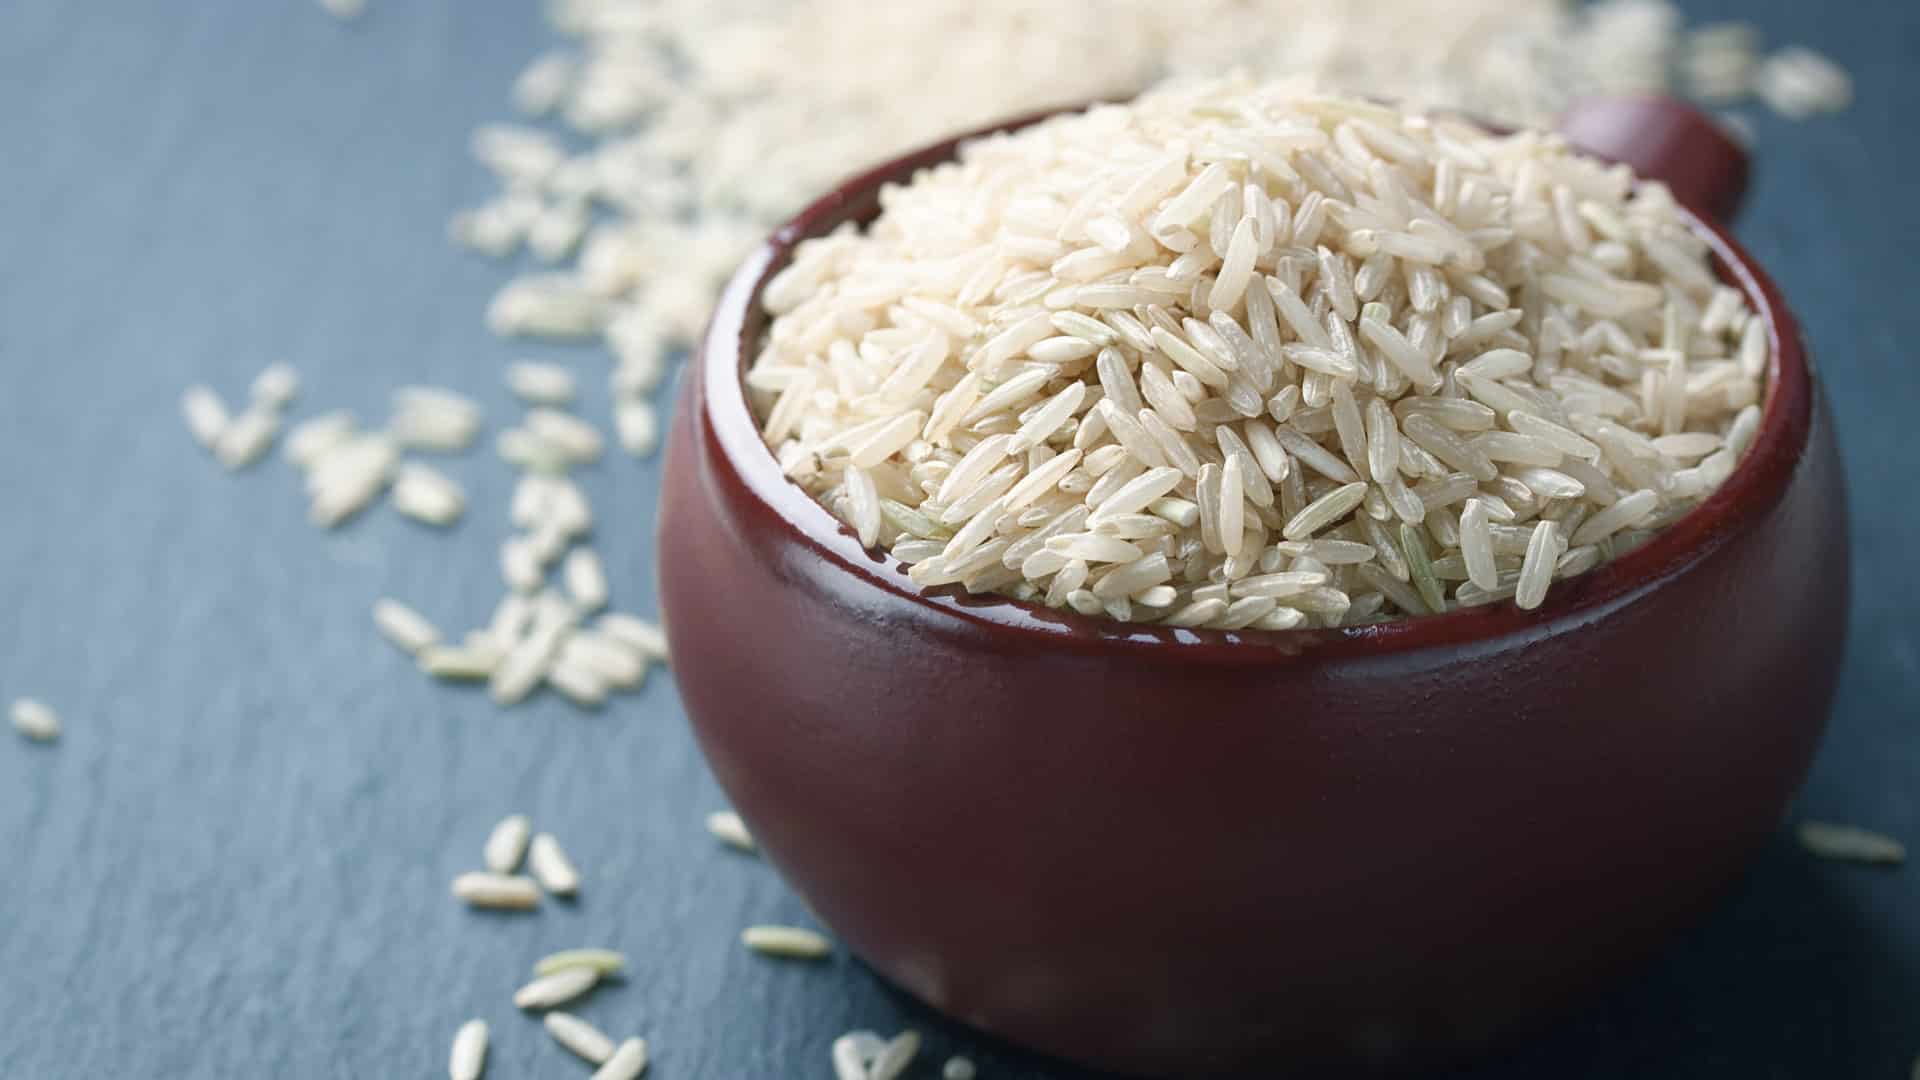 Tomar raises India's basmati rice export related concerns with EU